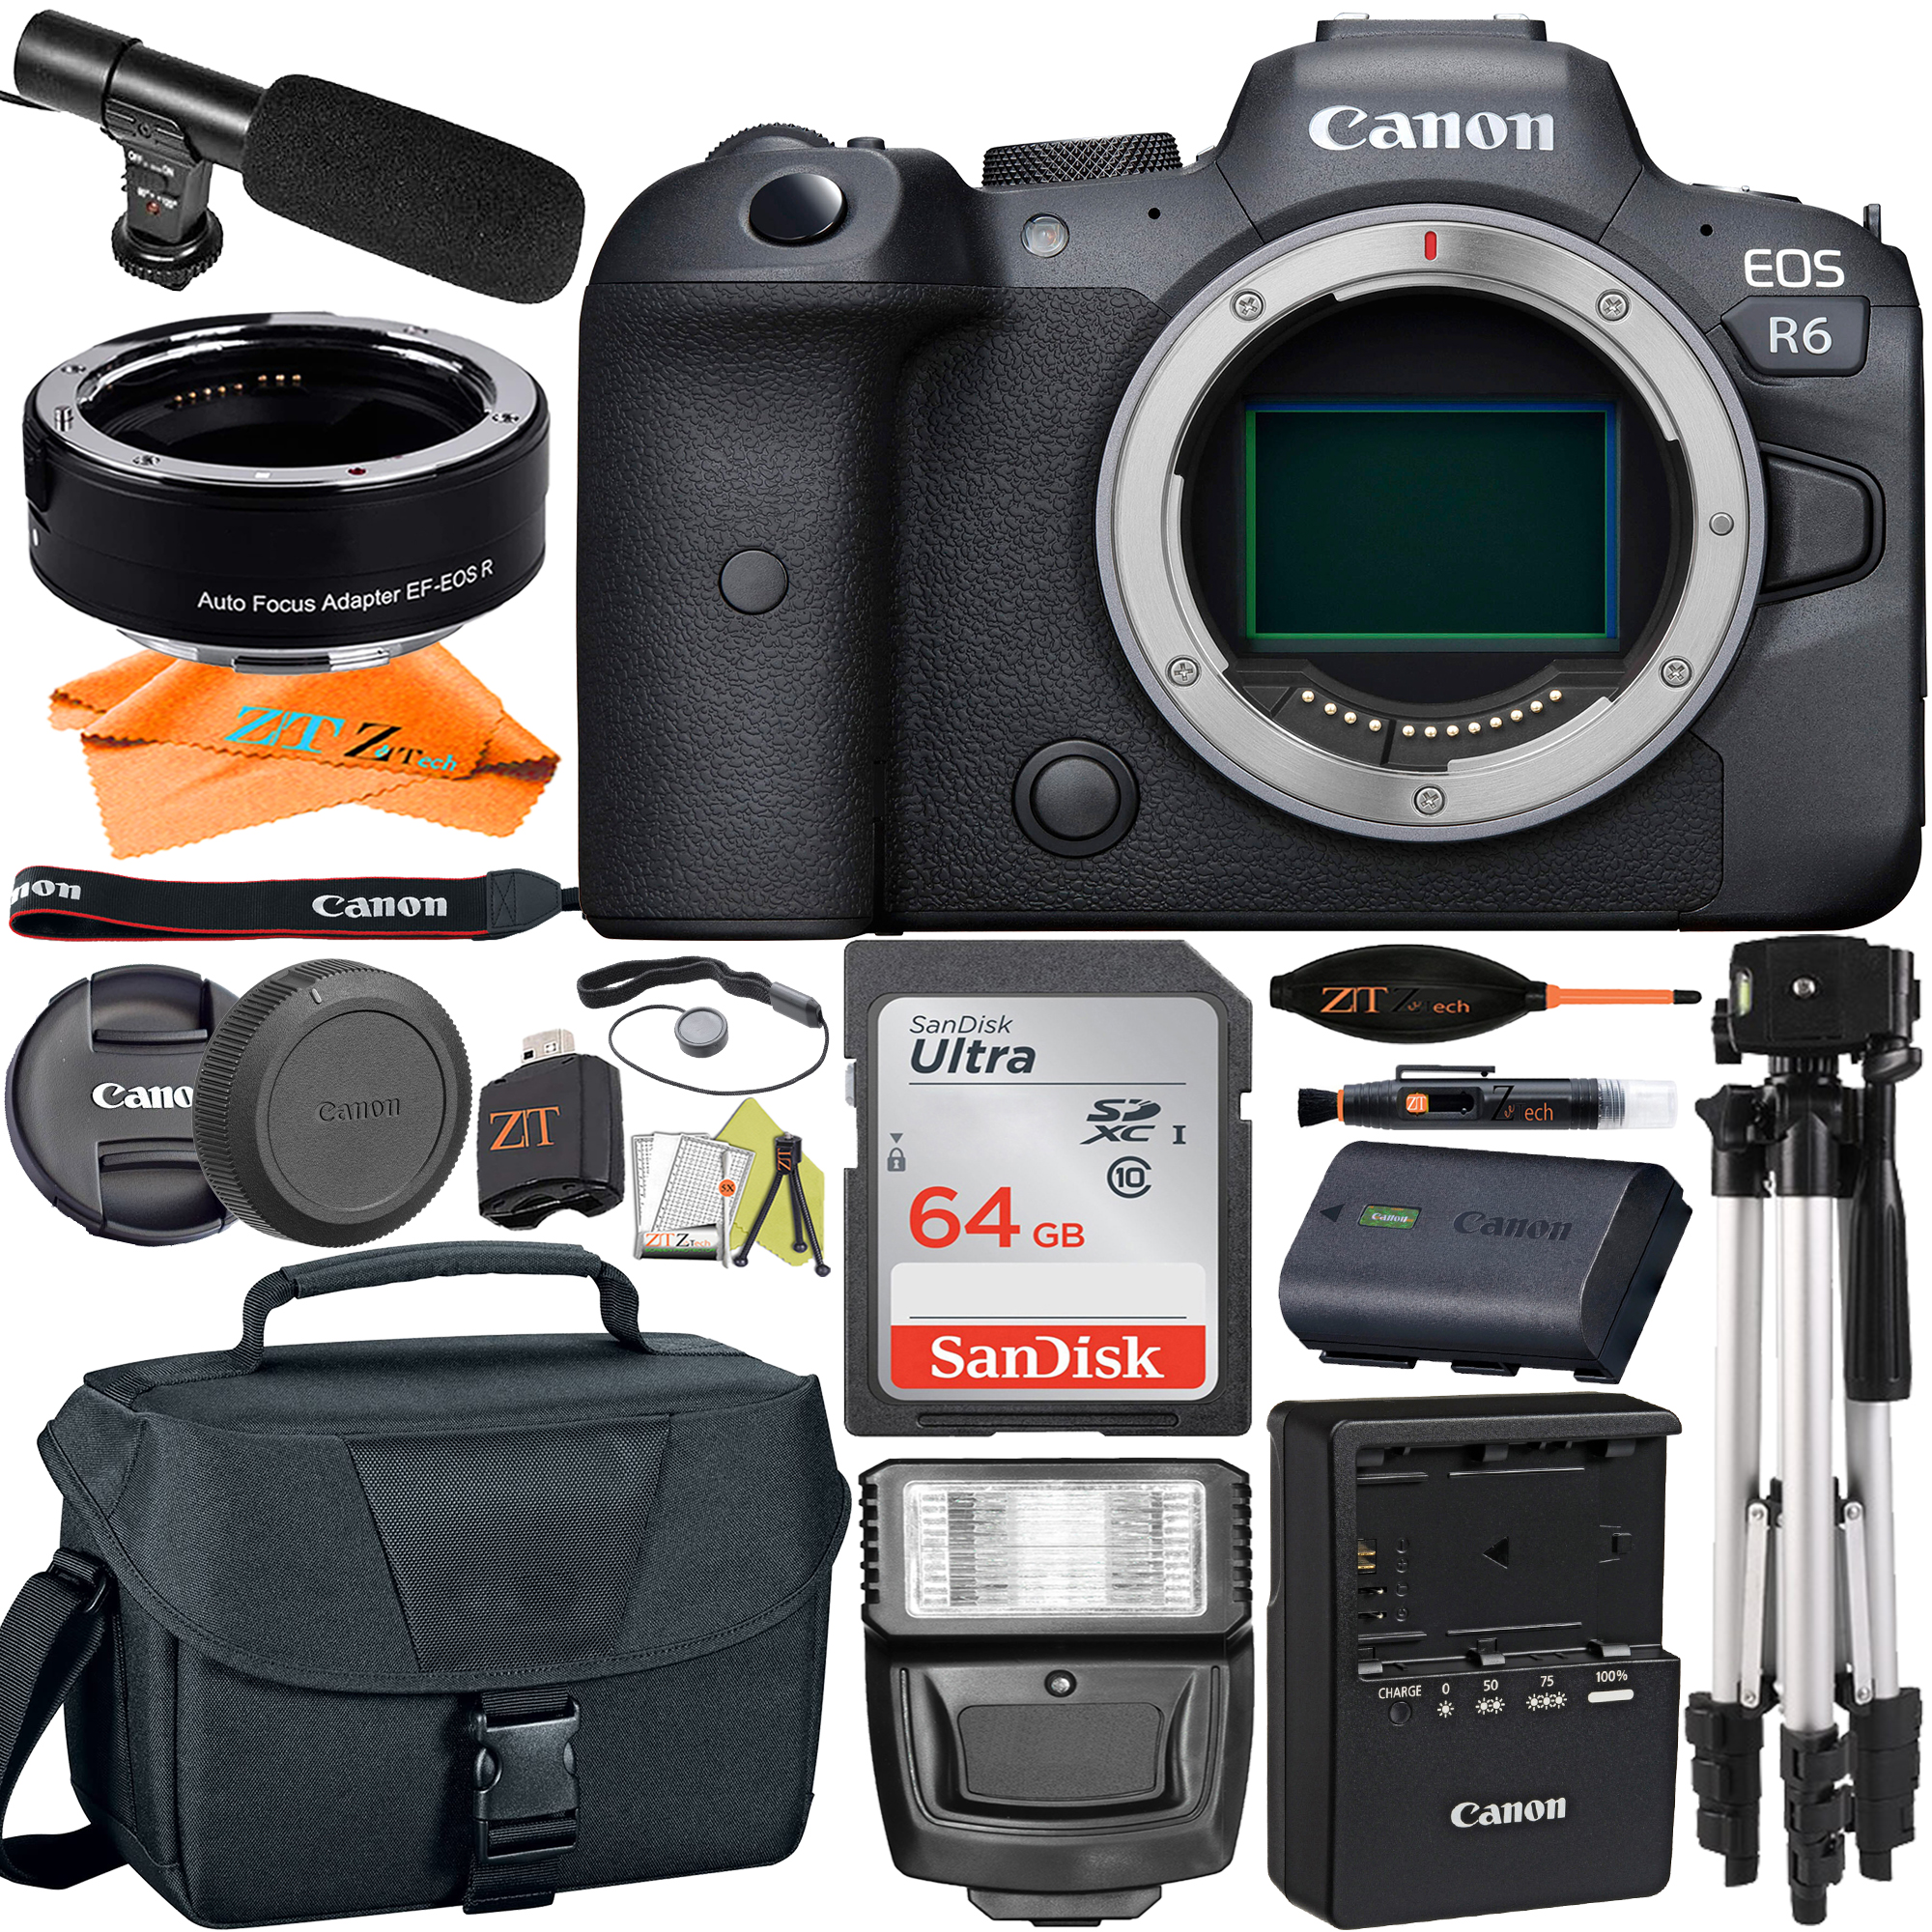 Canon EOS R6 Mirrorless Digital Camera (Body Only) with Mount Adapter + SanDisk 64GB Memory Card + Case + ZeeTech Accessory Bundle